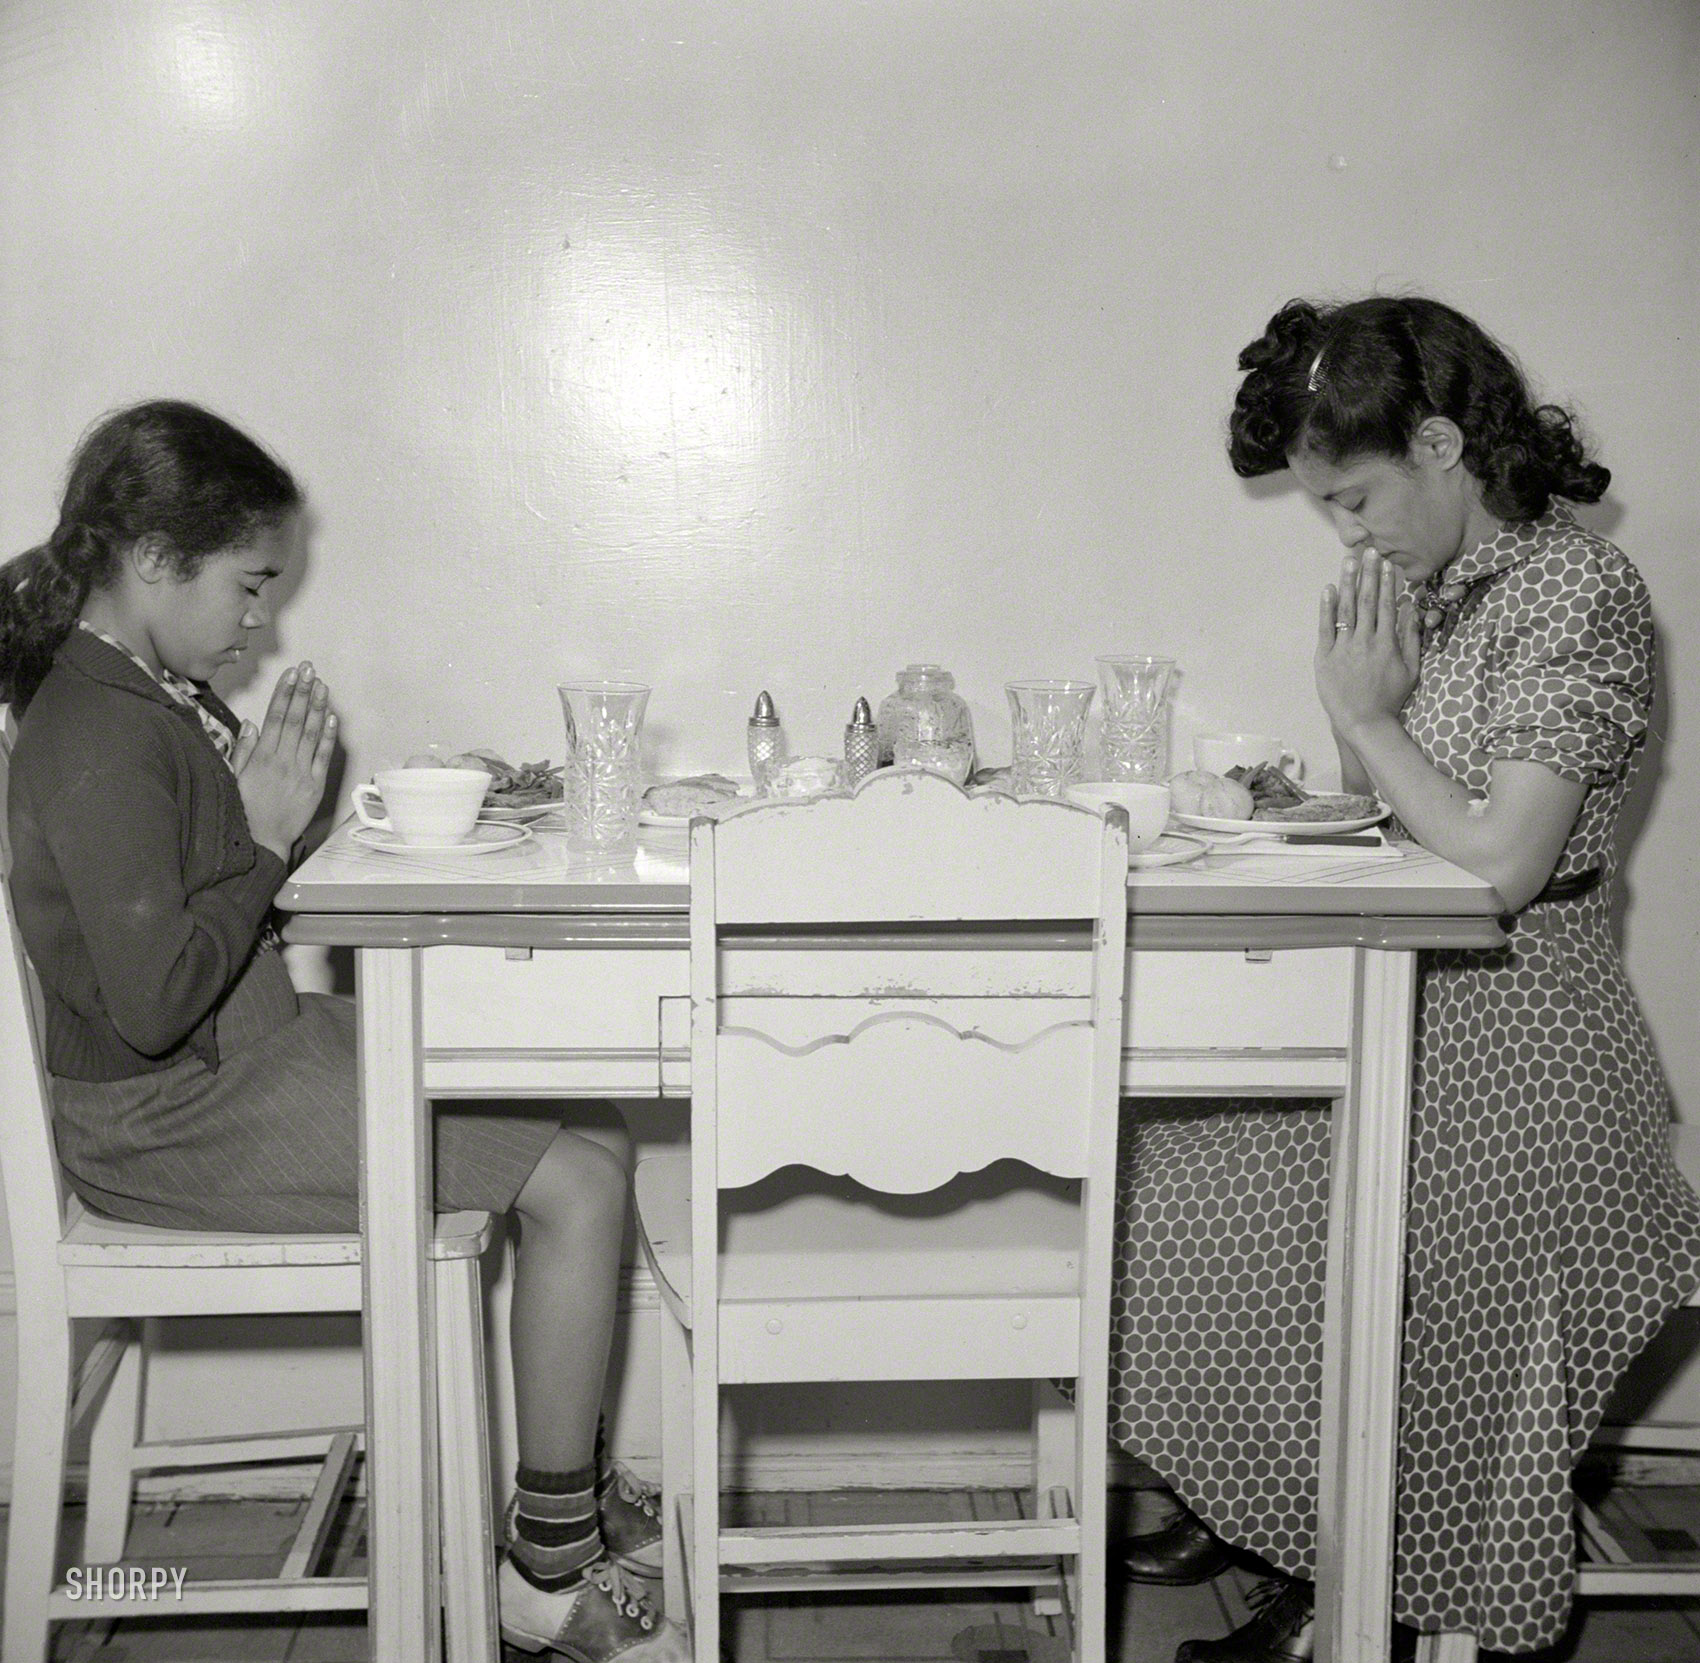 March 1942. Washington, D.C. "After a hard day's work in the Library of Congress, Jewel Mazique sits down to dinner with her niece." Medium-format negative by John Collier for the Office of War Information. View full size.